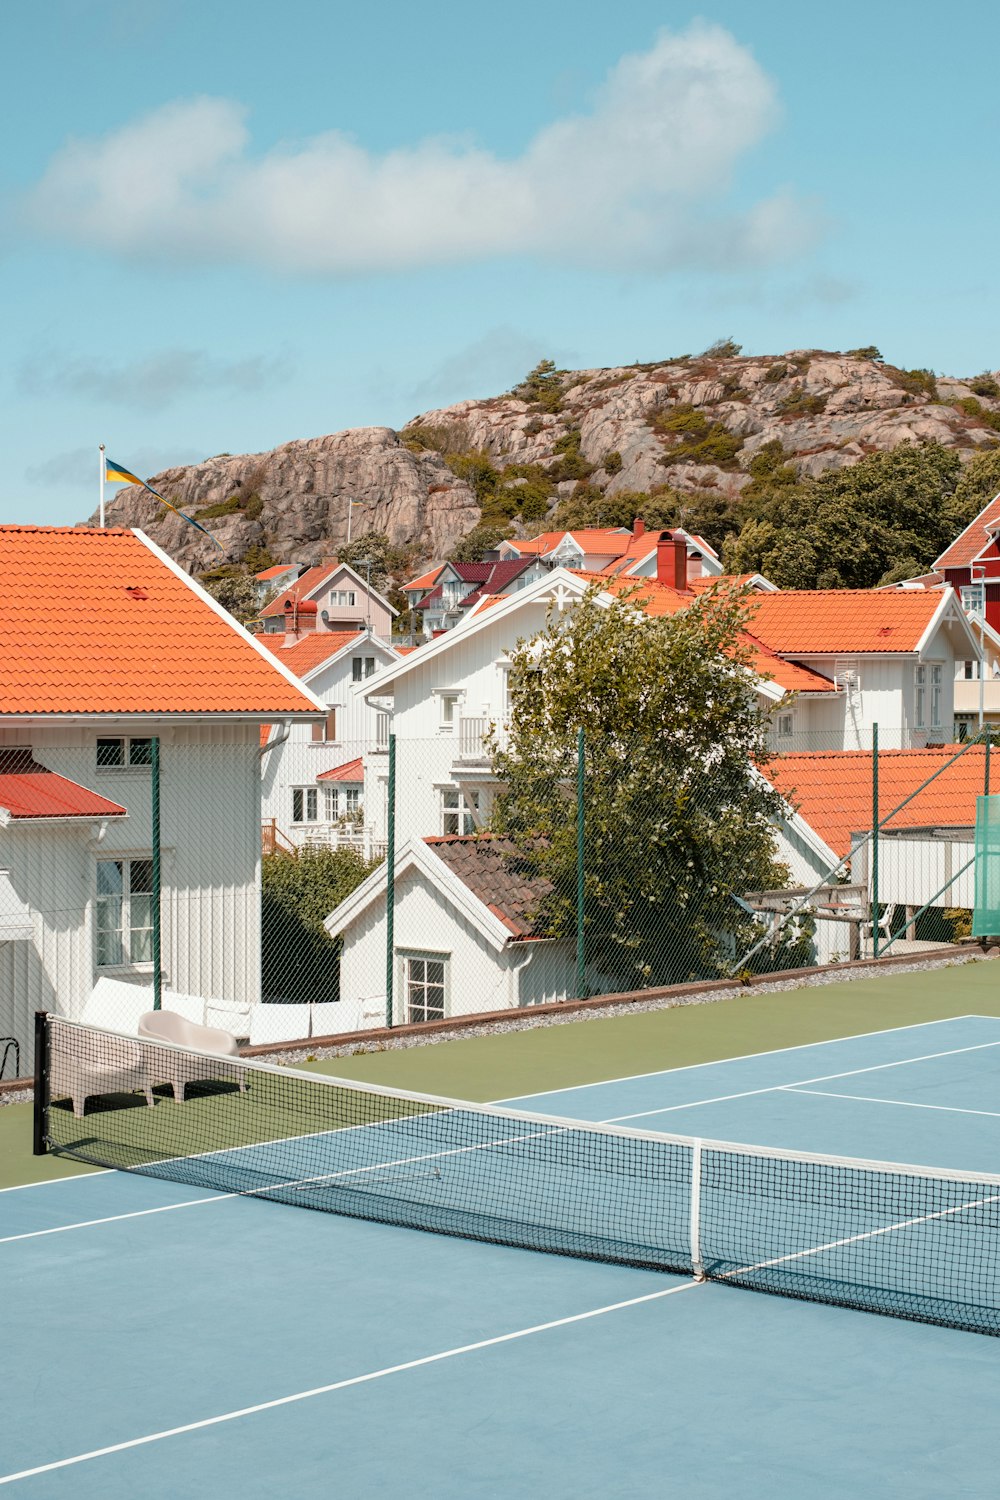 a tennis court with houses in the background